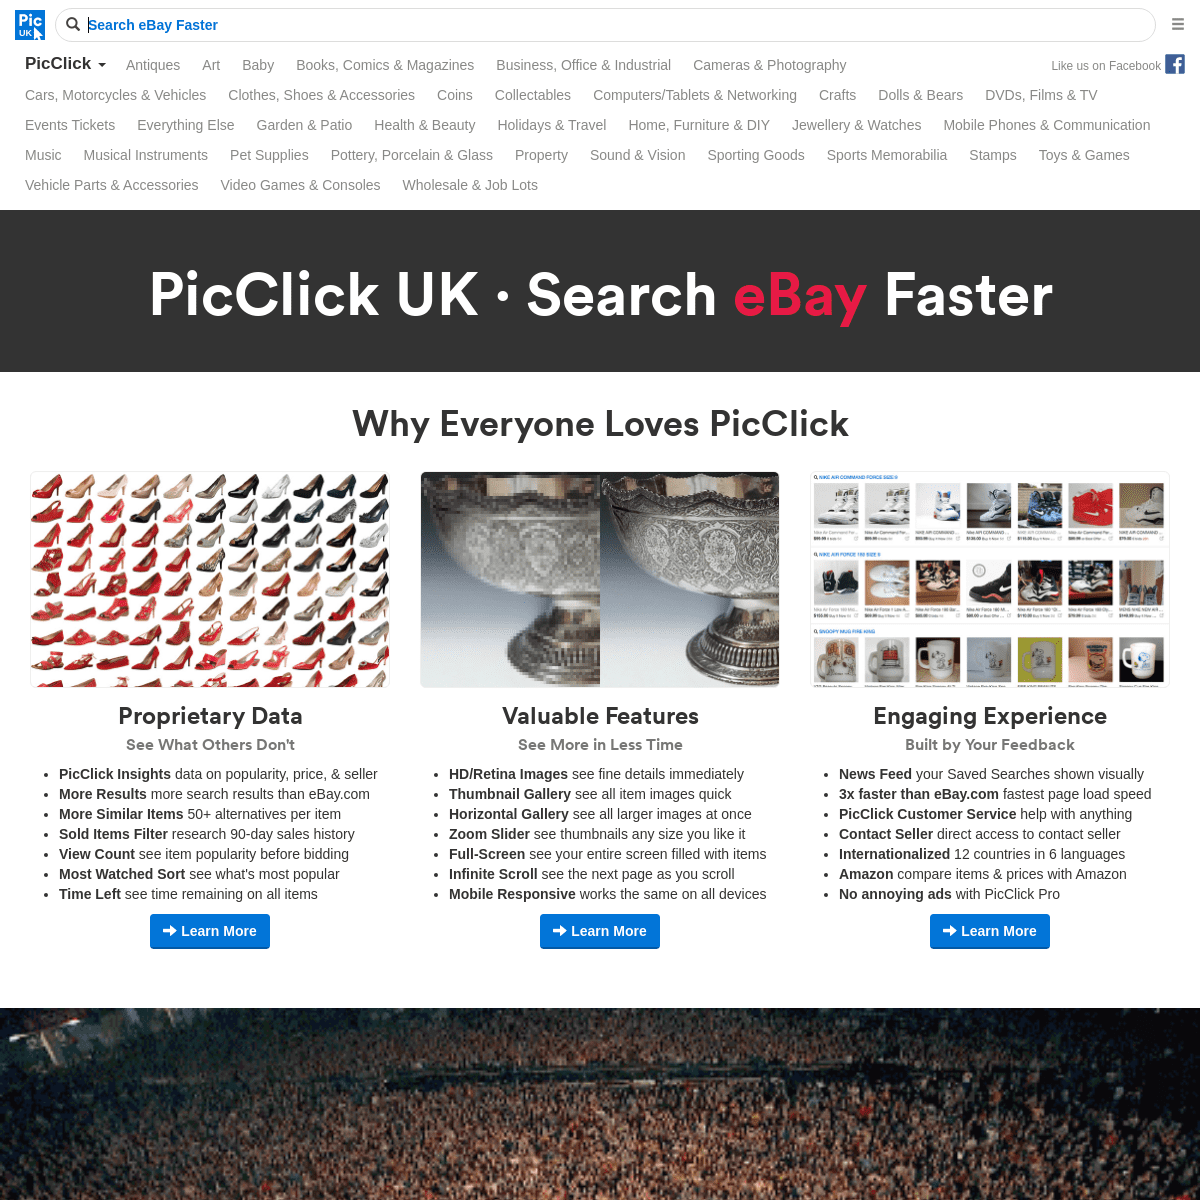 A complete backup of picclick.co.uk